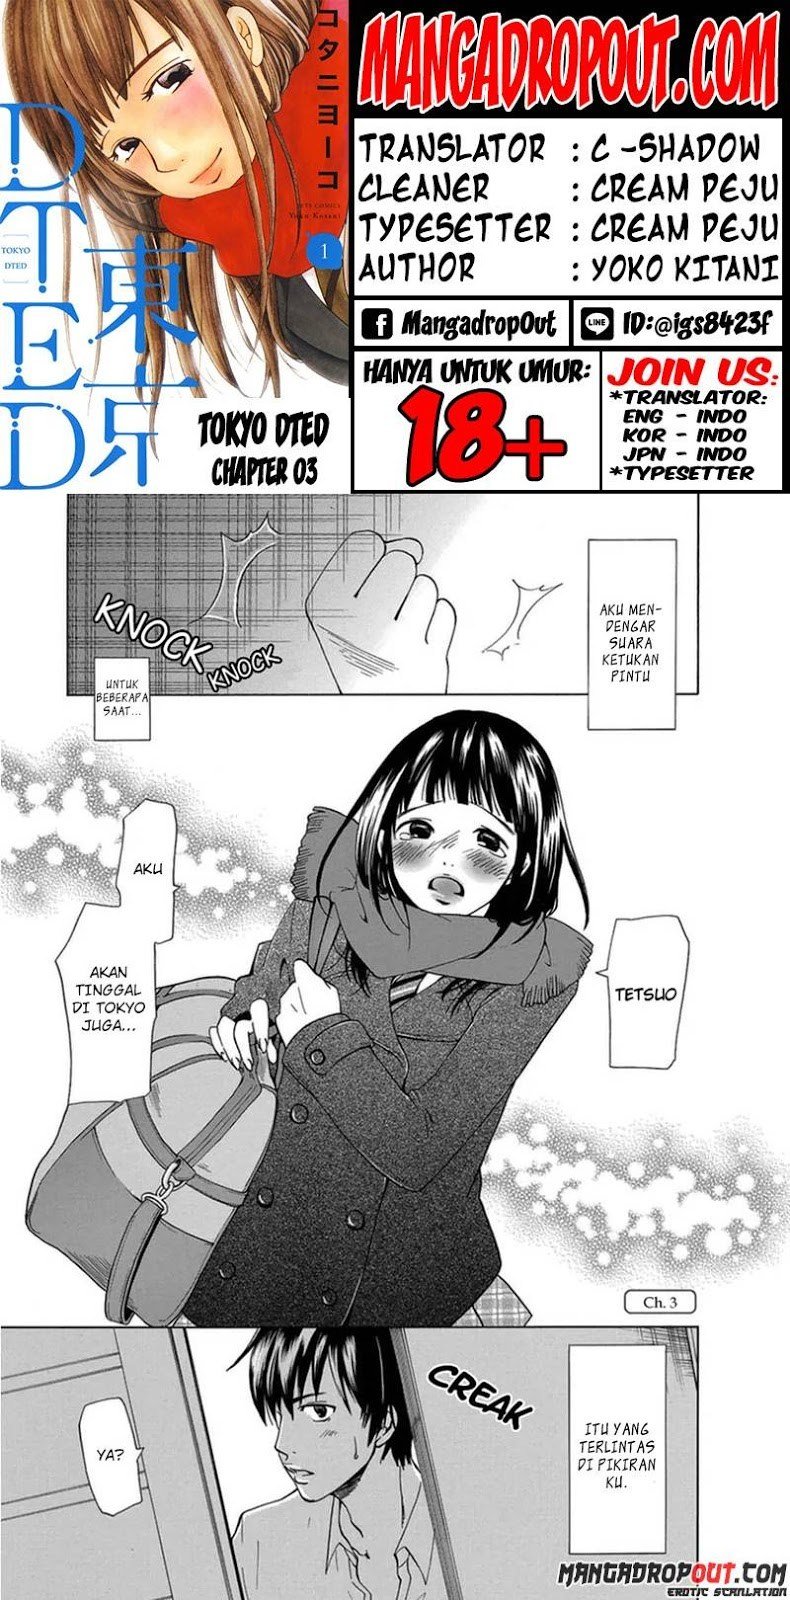 Tokyo DTED Chapter 03